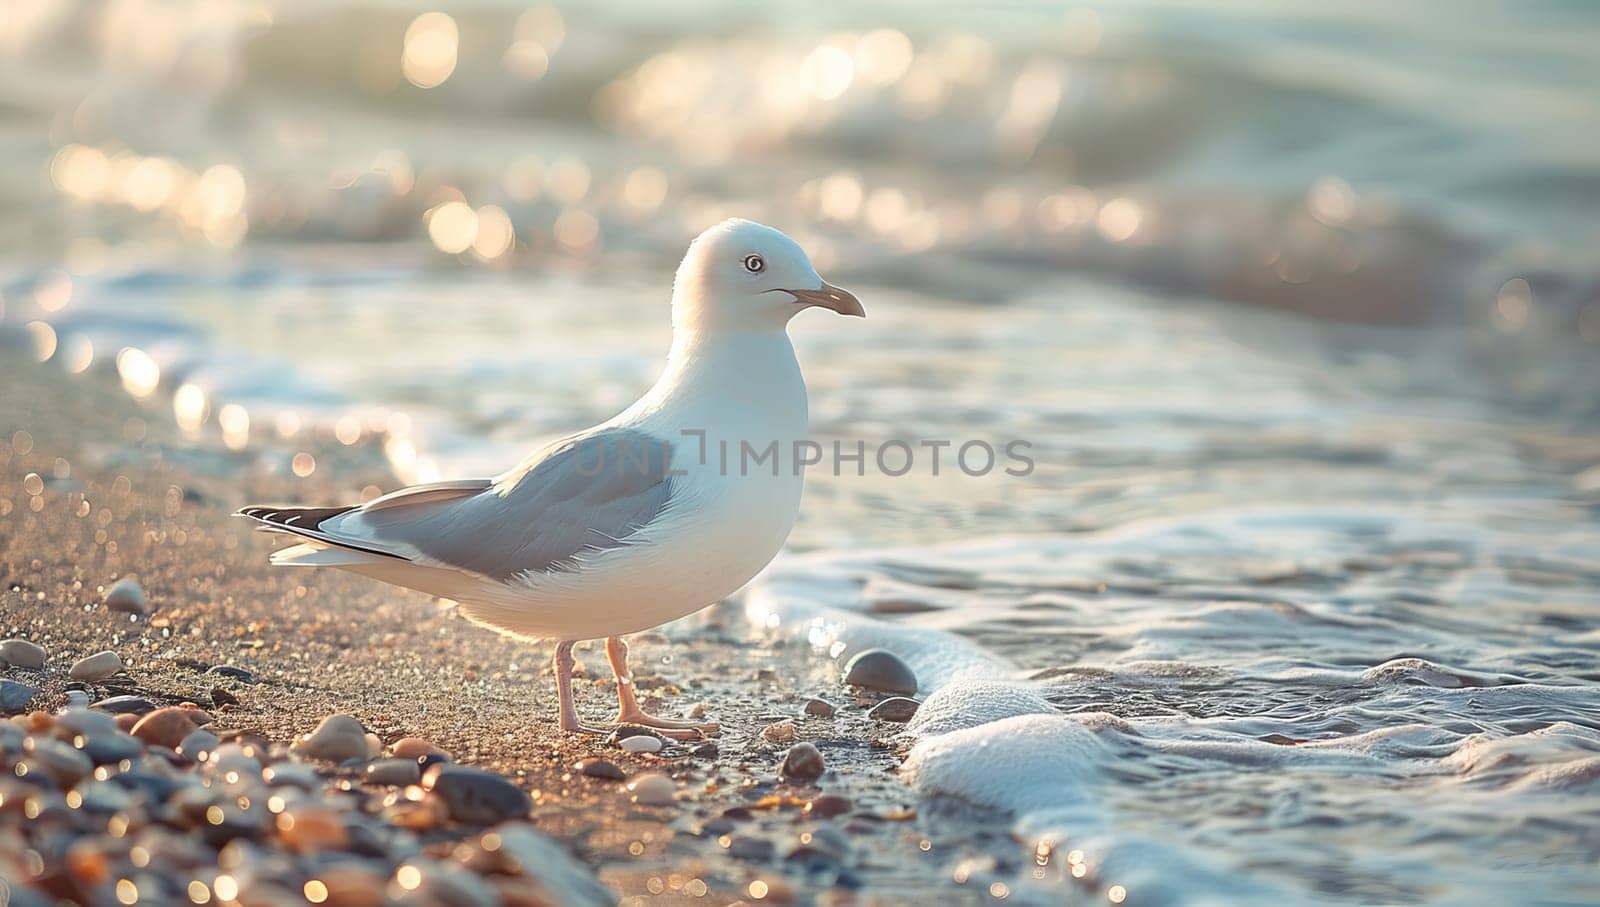 Seagull on the seashore in the rays of the setting sun by ailike